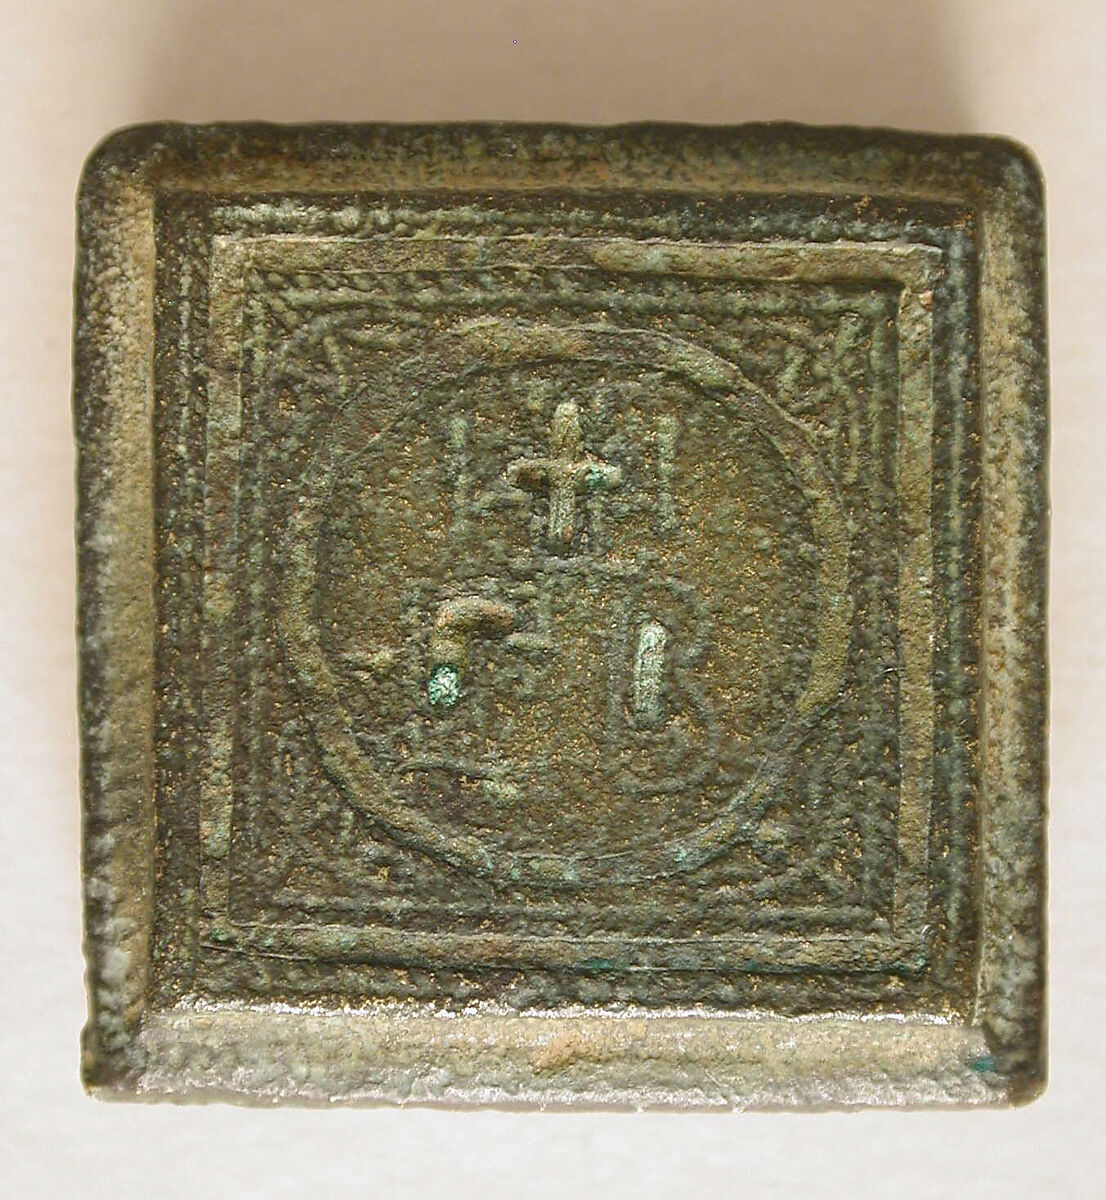 Copper-Alloy Balance Weight with Cross in a Circular Border, Copper alloy, Byzantine 